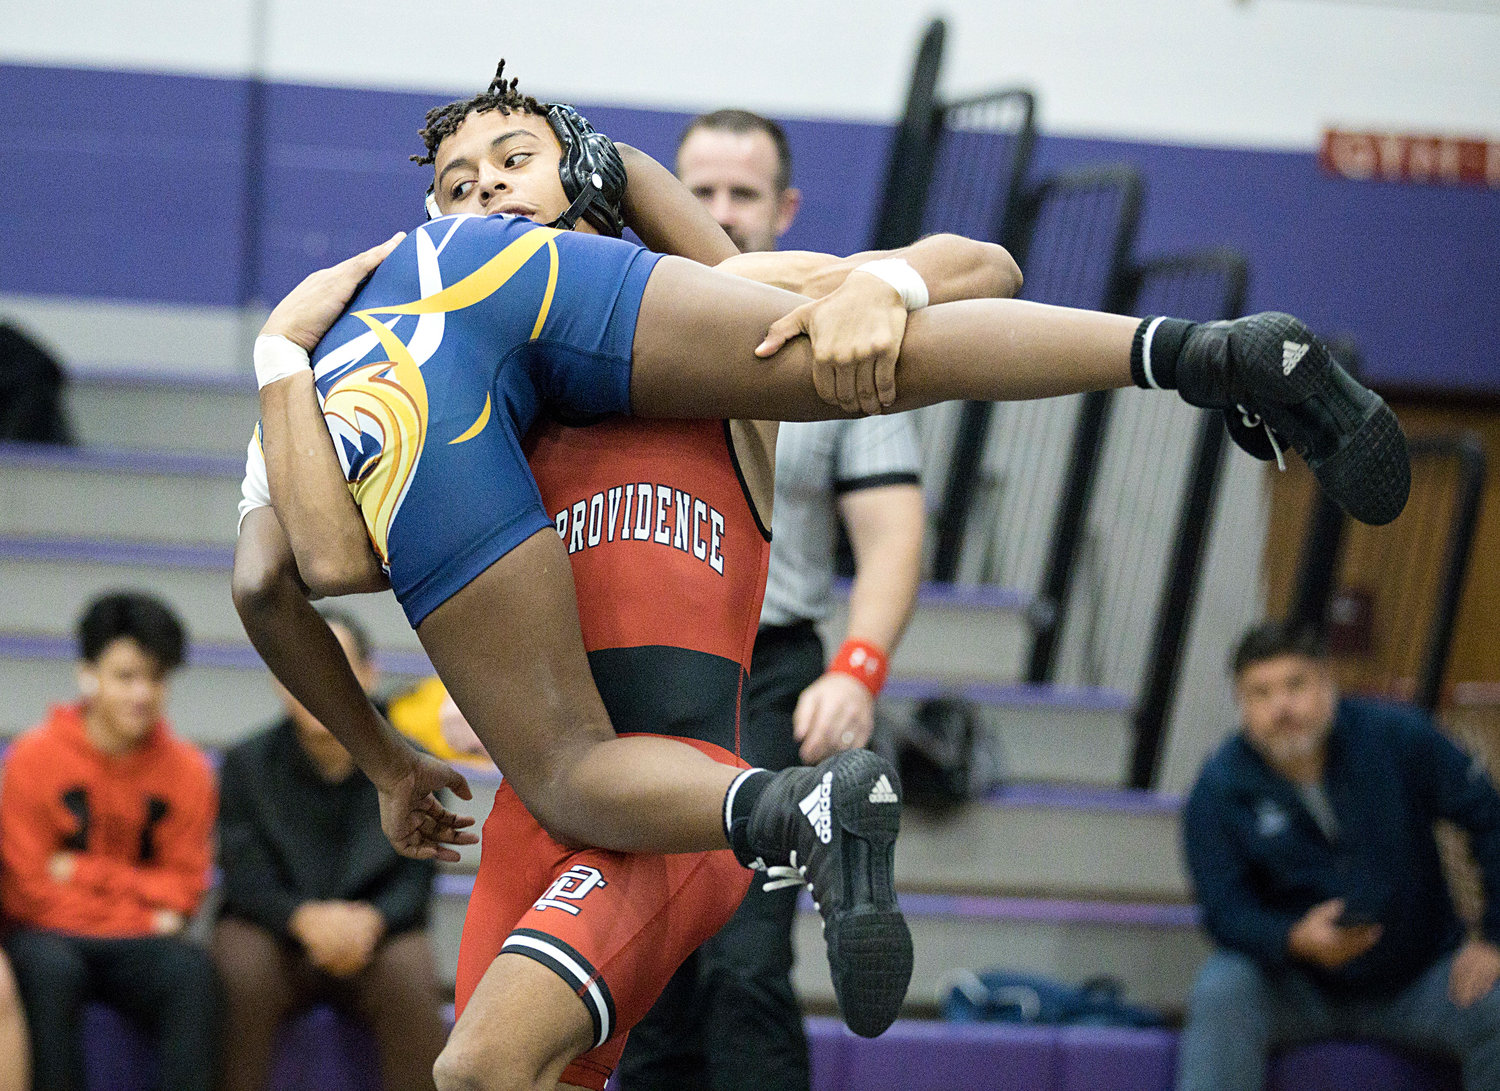 EPHS senior Martim Moniz controls his Barrington opponent during a match at 120 pounds earlier this season. Last weekend, Moniz collected his third tournament title of the winter in the weight class.